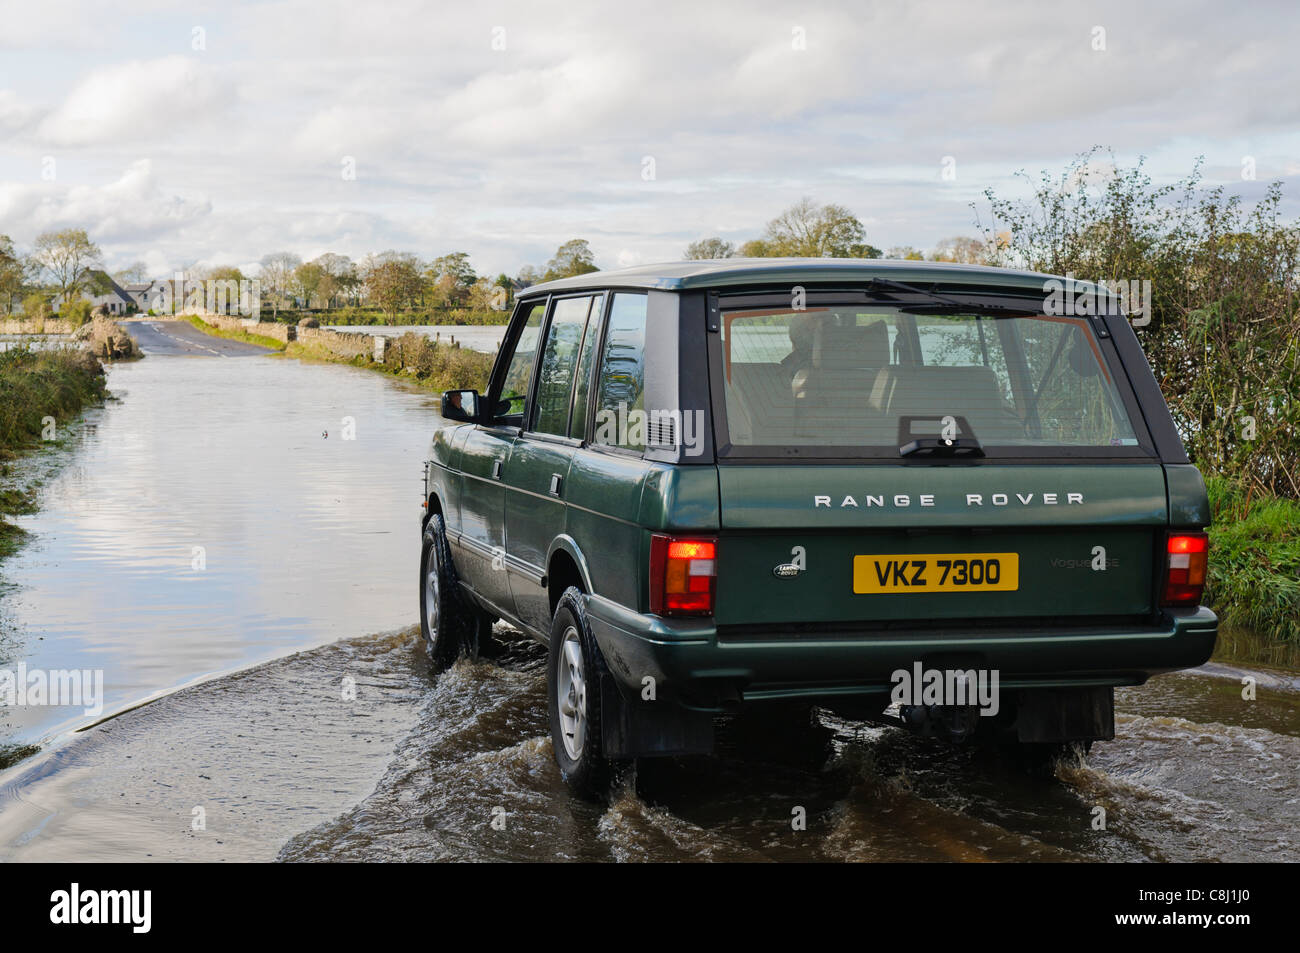 Man drives Range Rover through flooded rural road in Northern Ireland on Tuesday, 25th October, 2011. Stock Photo